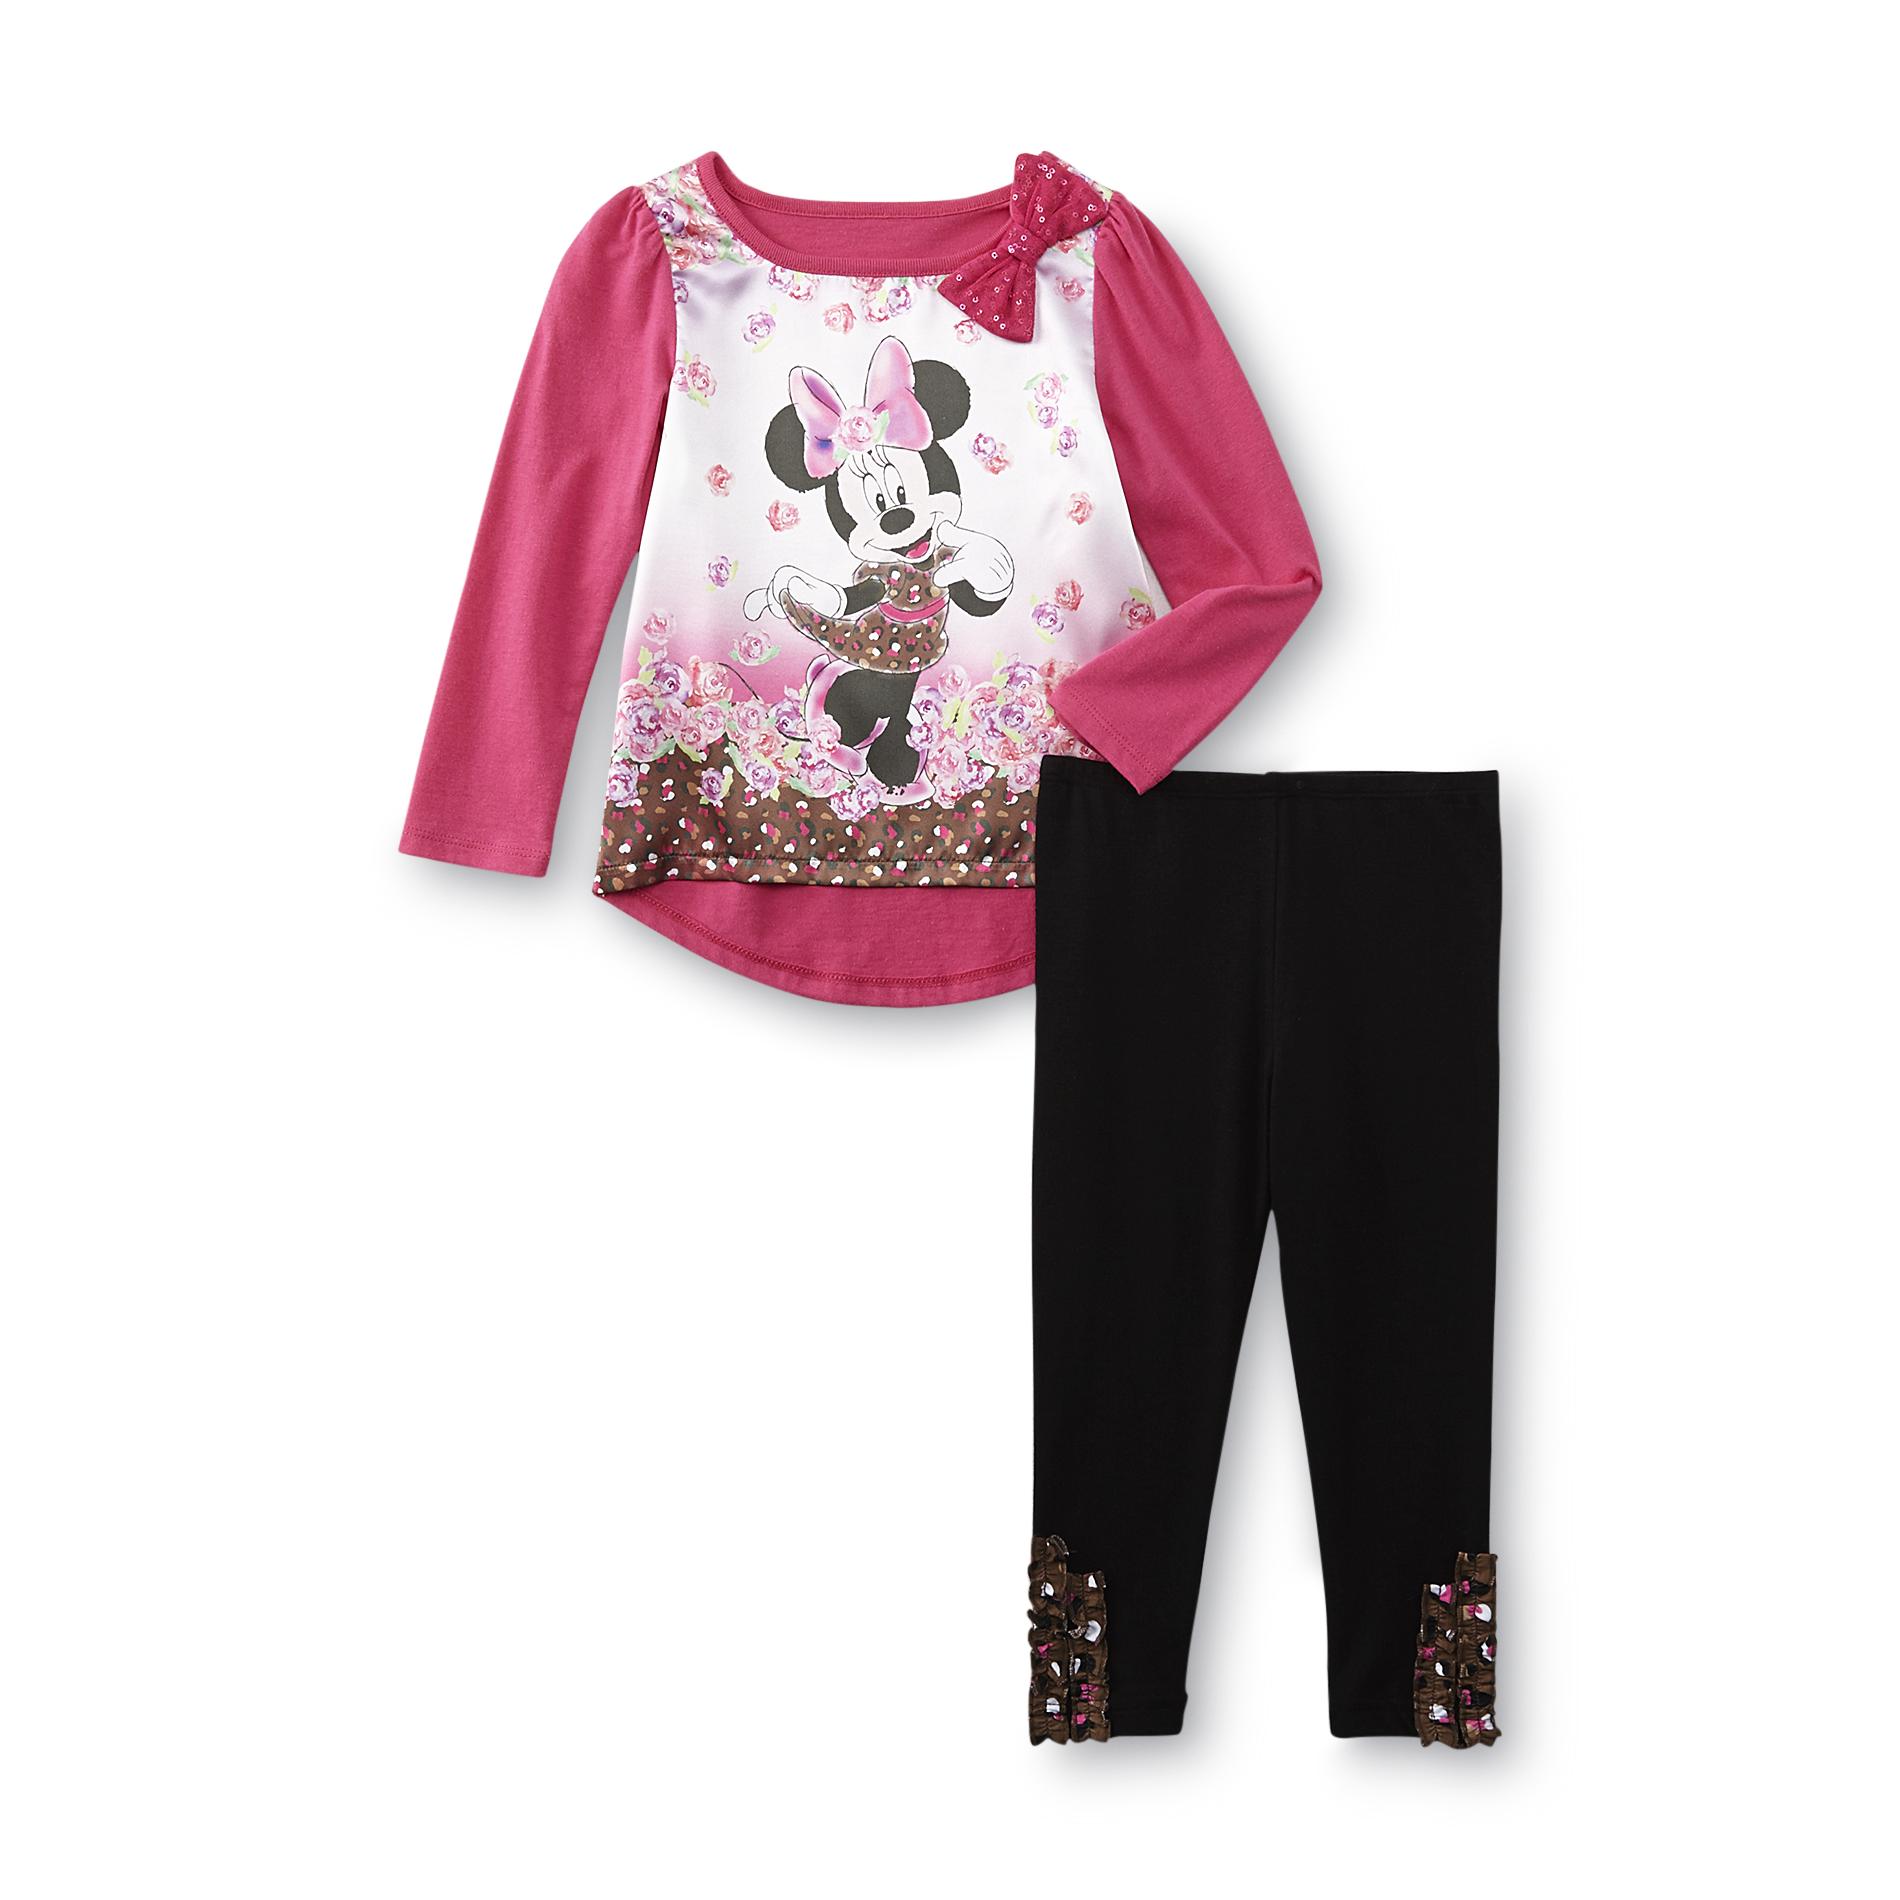 Disney Minnie Mouse Toddler Girl's Top & Leggings - Floral